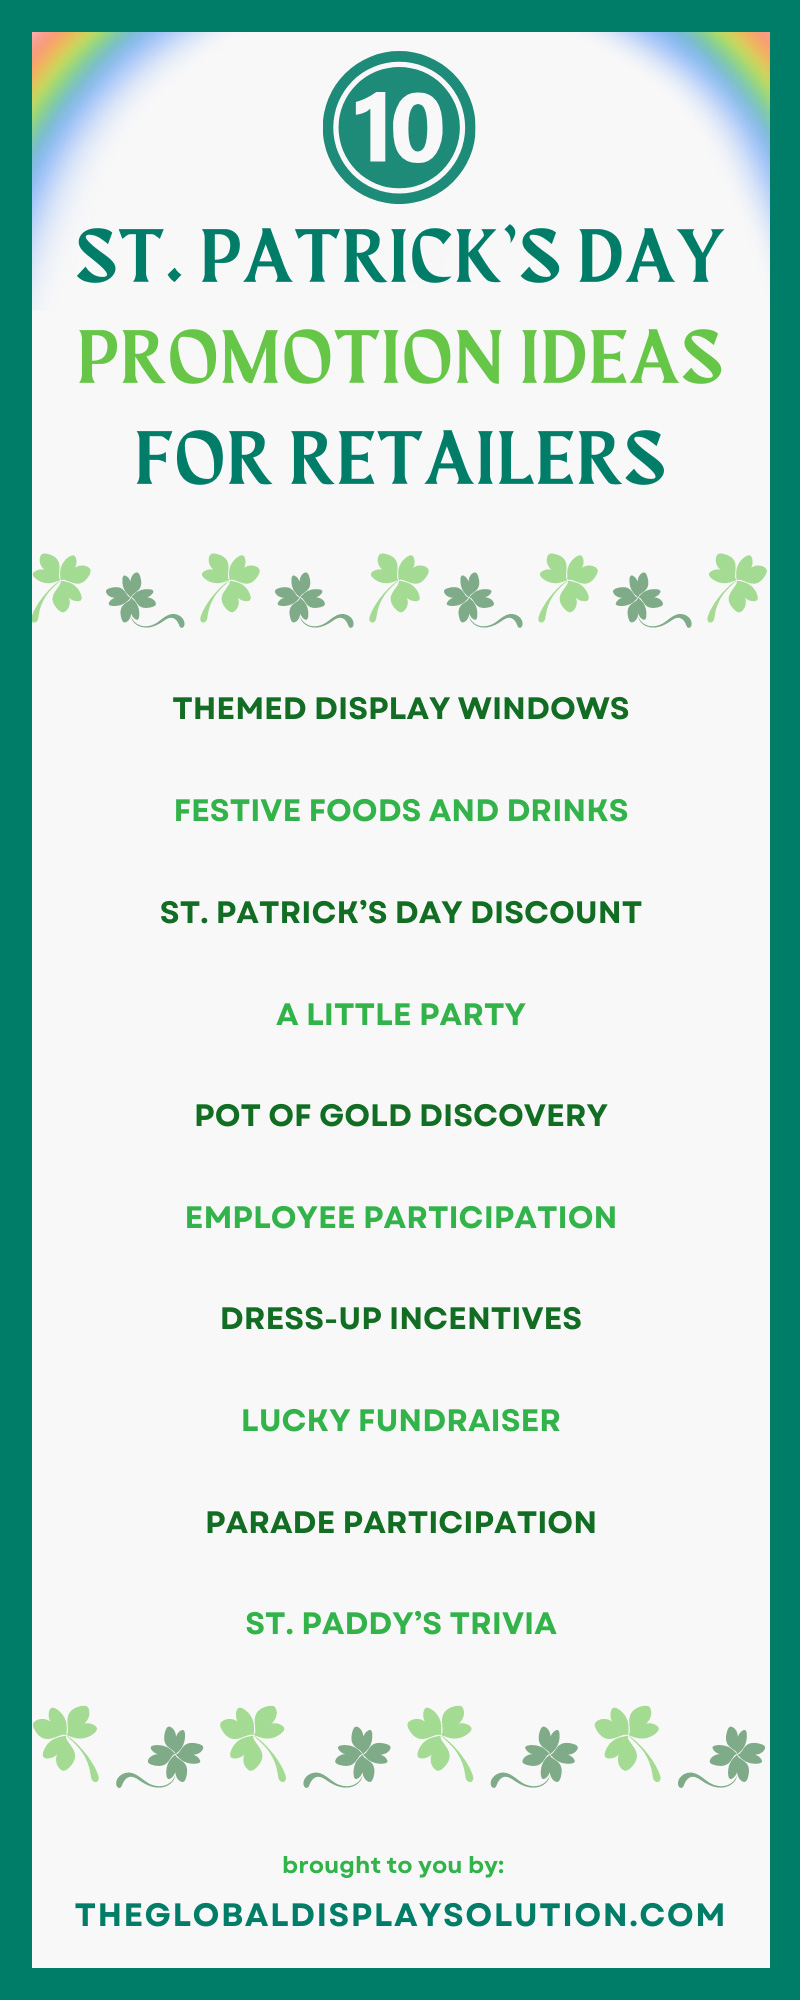 10 St. Patrick’s Day Promotion Ideas for Retailers